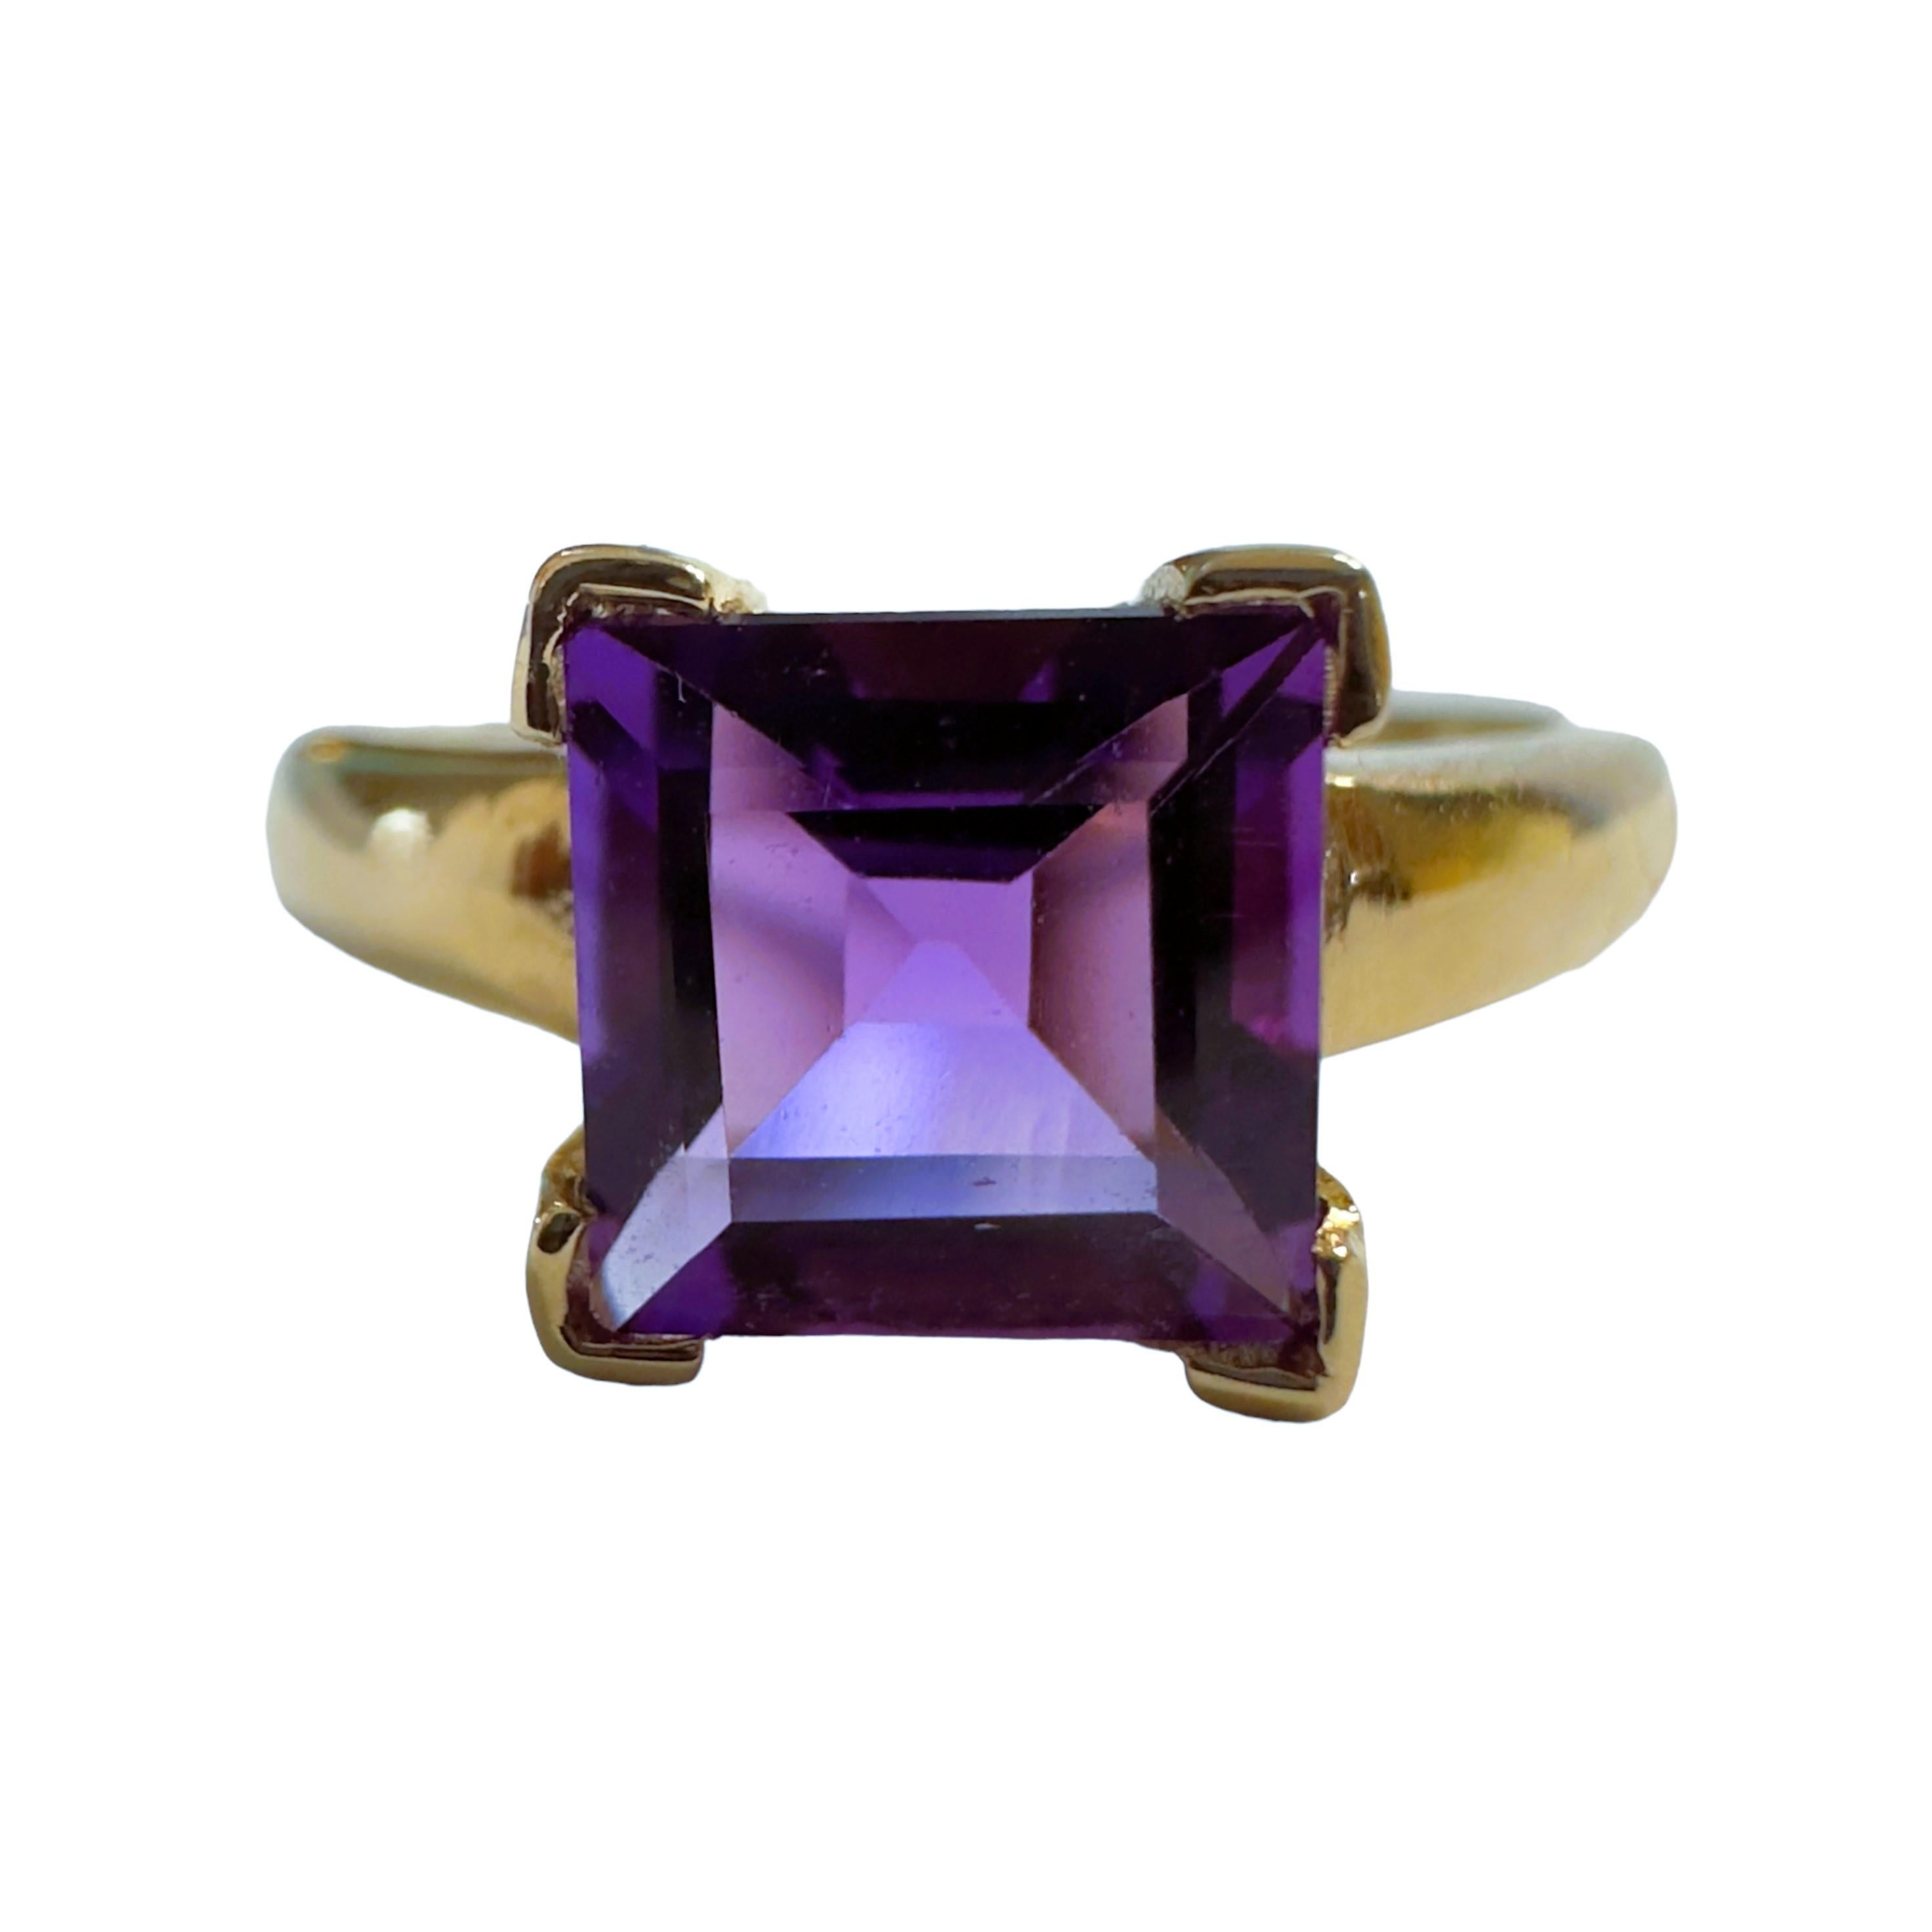 What a gorgeous ring this is!!  It has a beautiful asscher cut amethyst stone. It is a size 6.75.  I just love the simple but classy design it has   It is stamped 